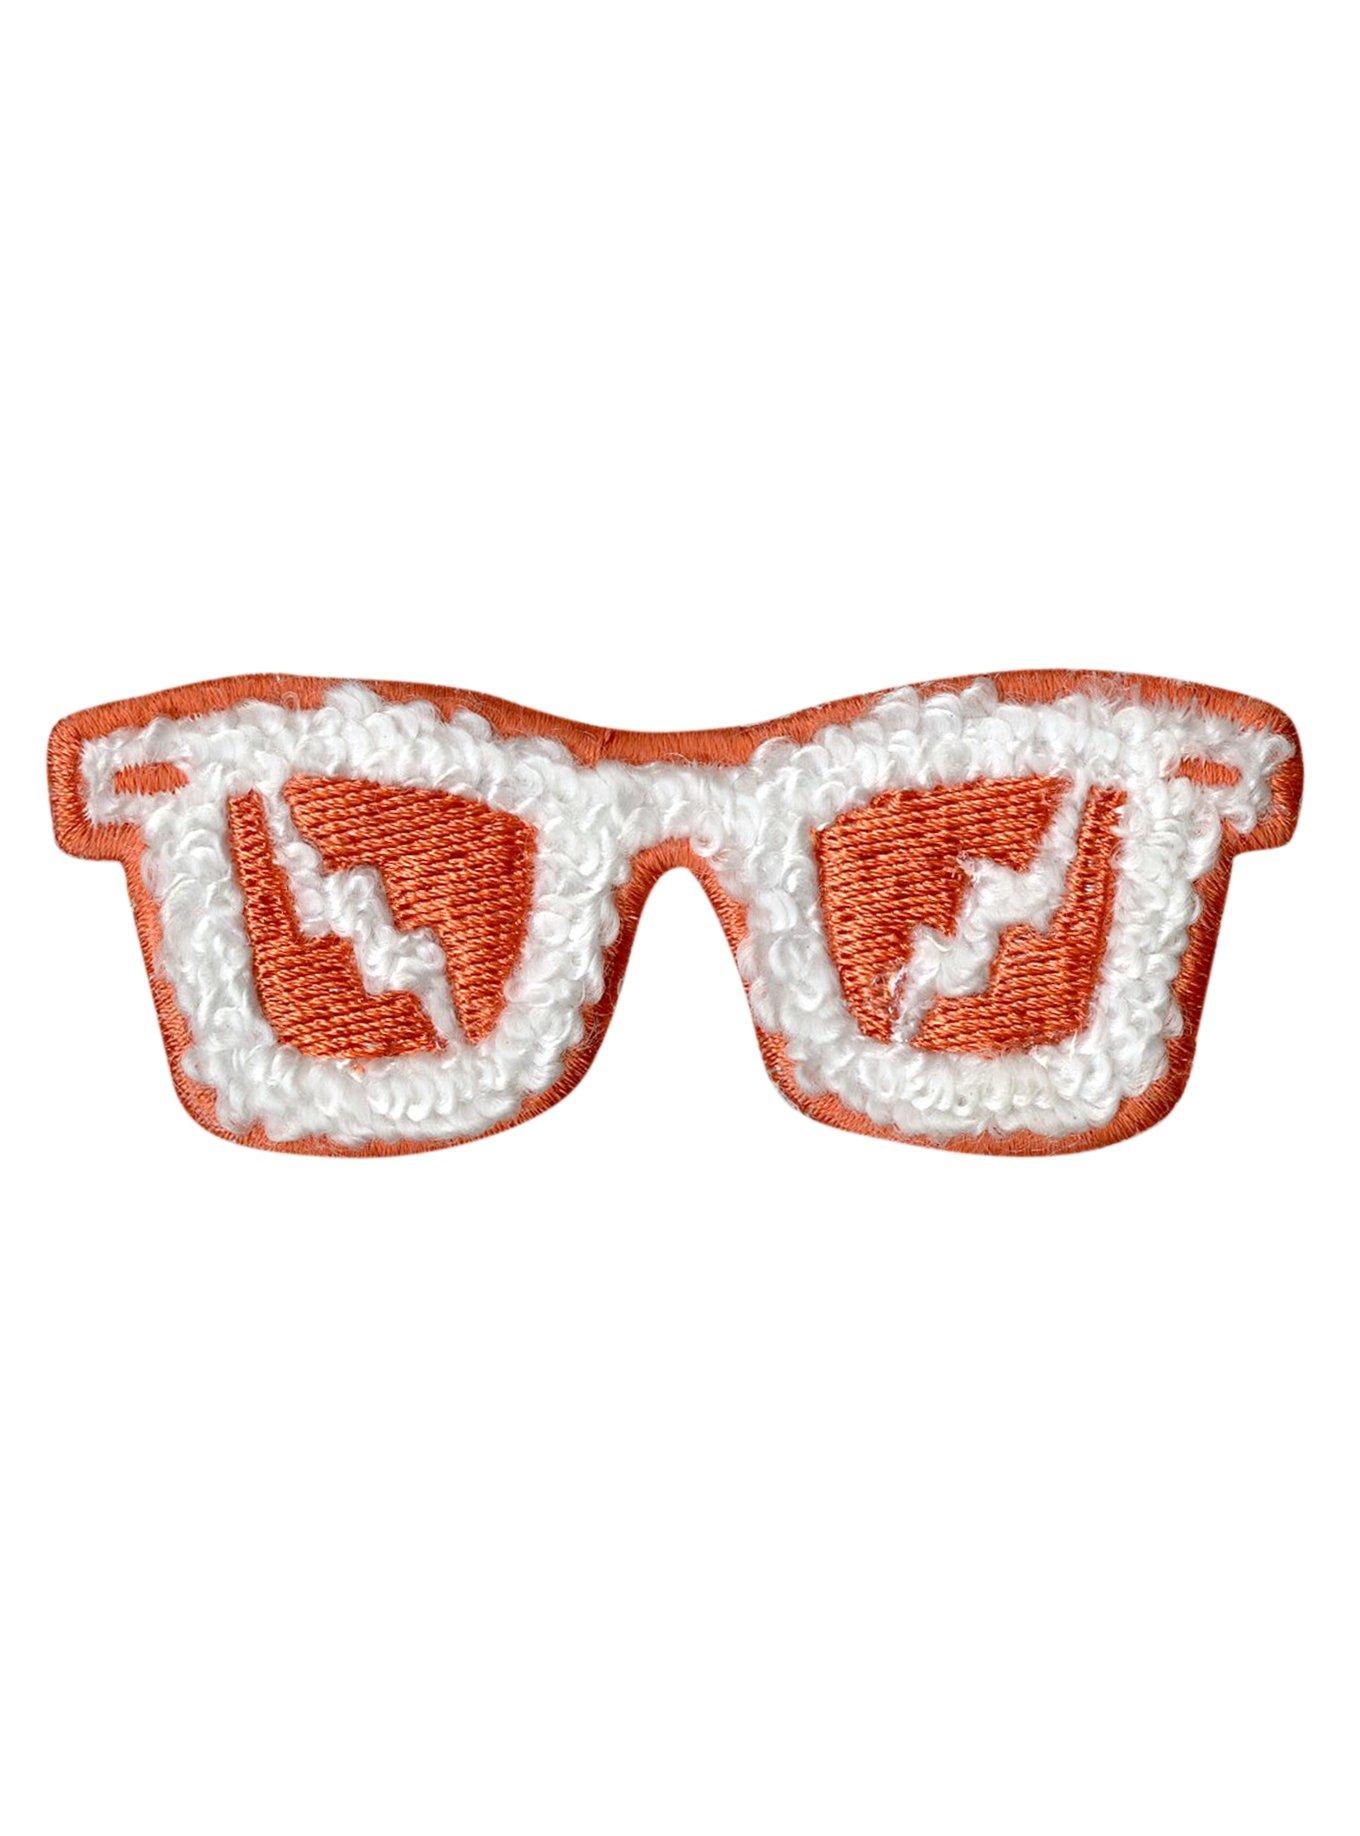 Sunglasses Chenille Iron-On Patch, , hi-res